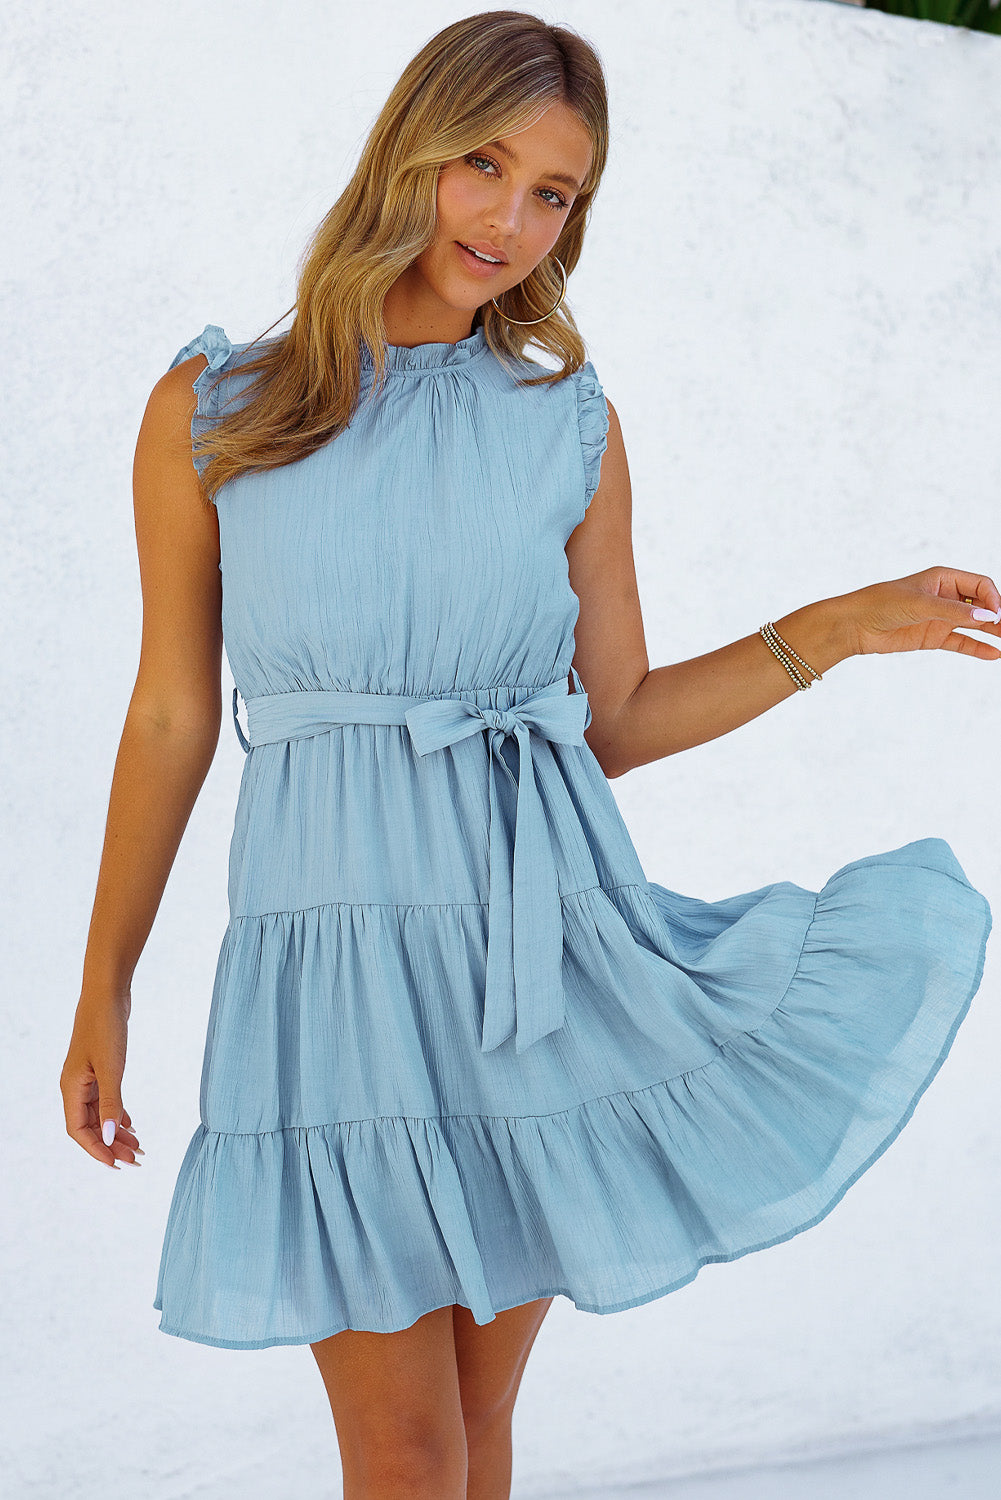 Sky Blue Frilled Neck Sleeveless Tiered Tulle Dress